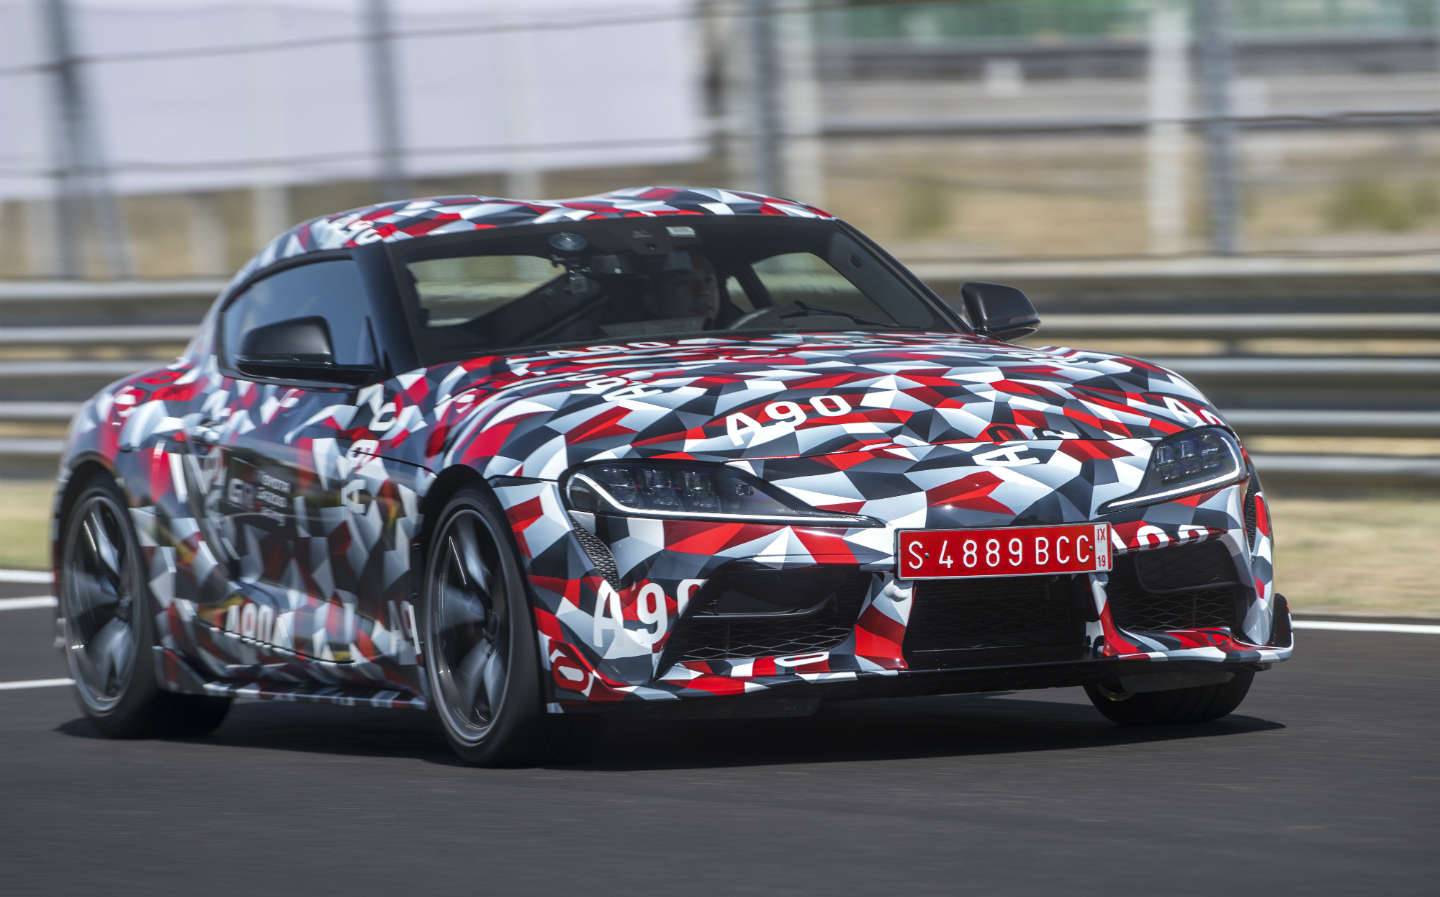 2019 Toyota Supra: On sale date, prices and details